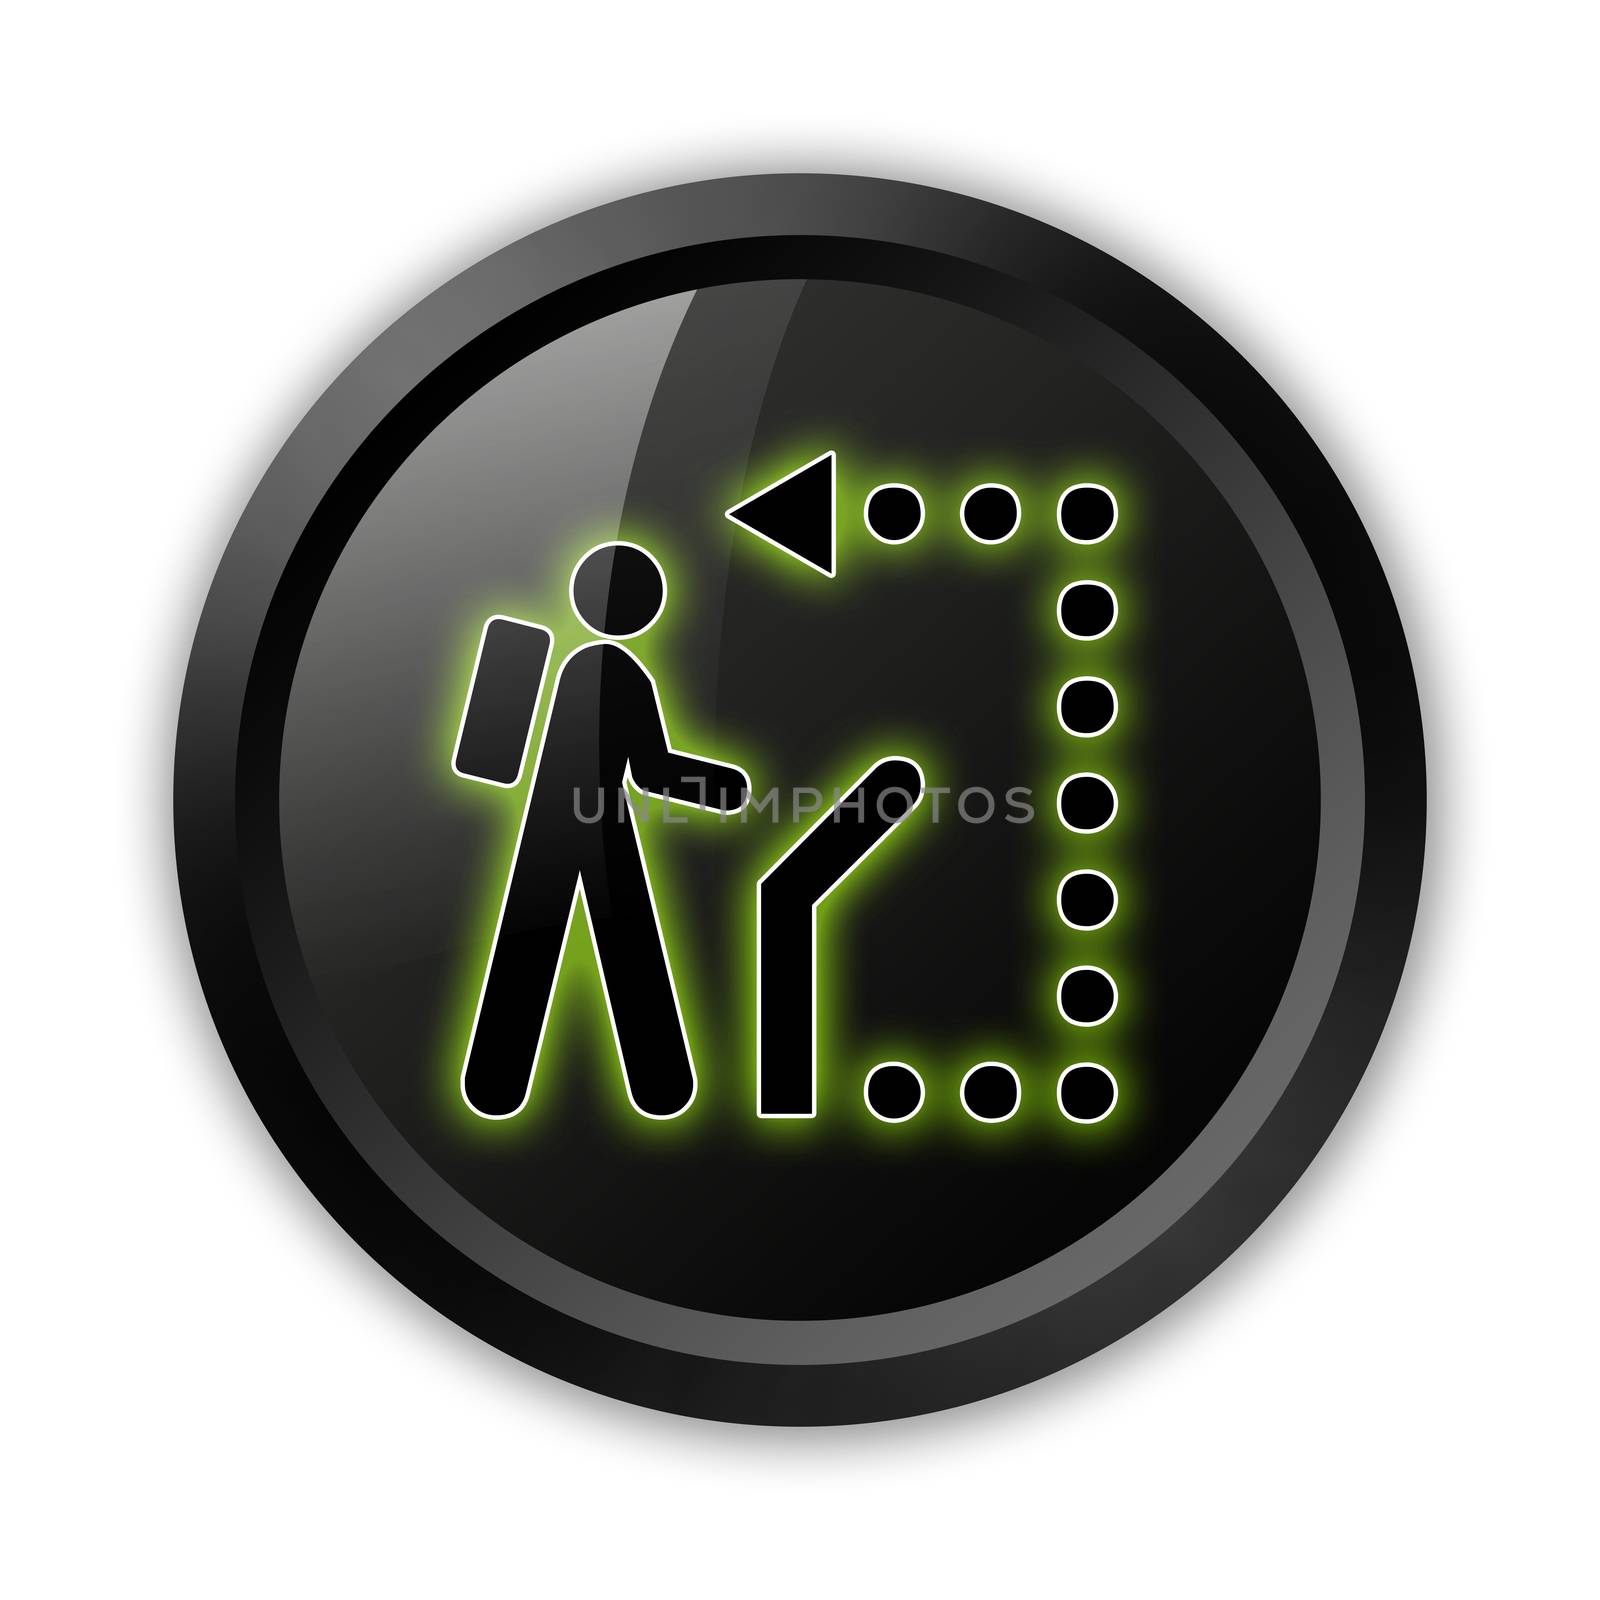 Icon, Button, Pictogram with Self-Guiding Trail symbol